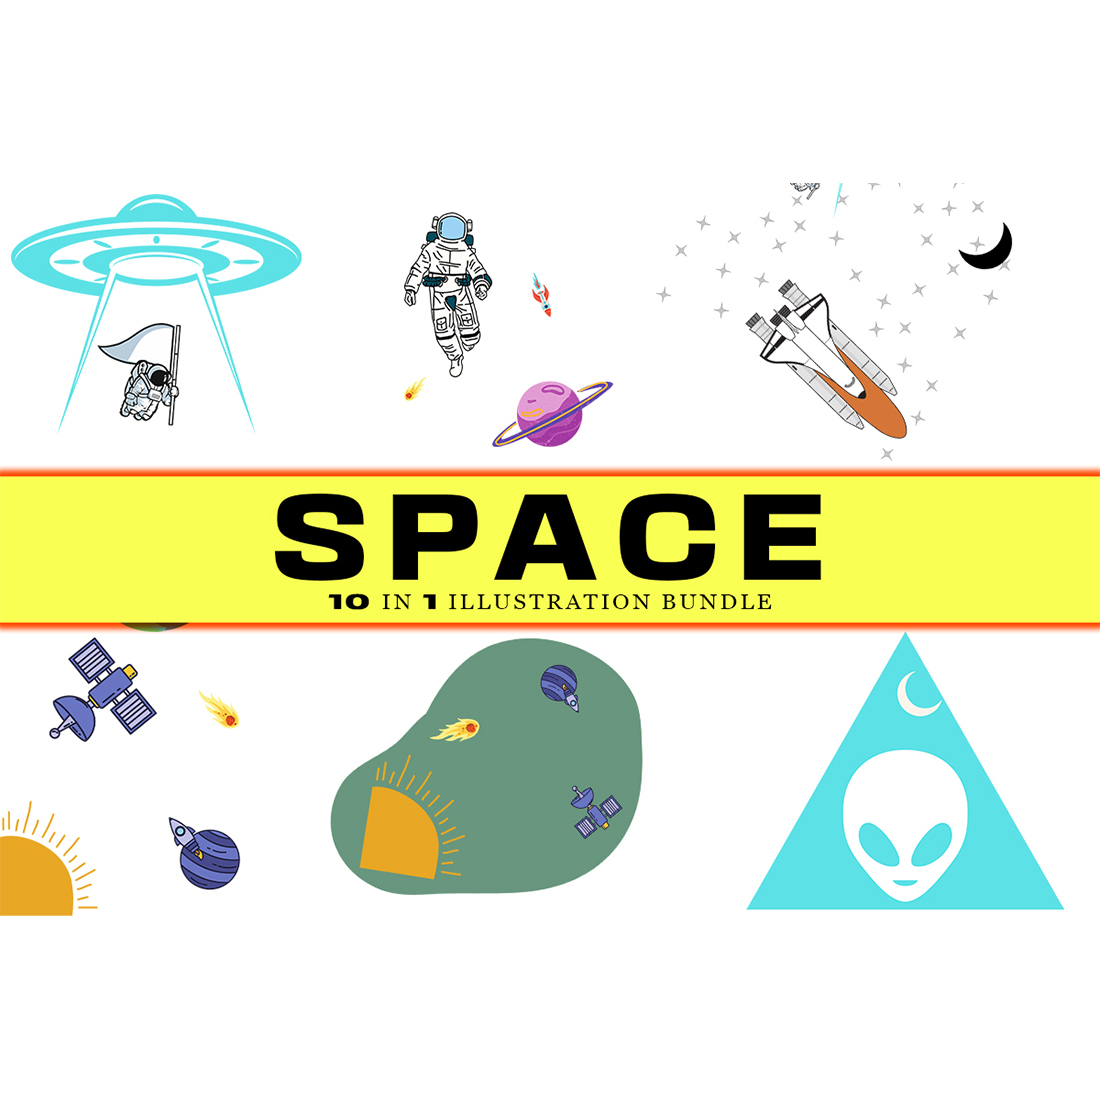 A selection of colorful images on the theme of space